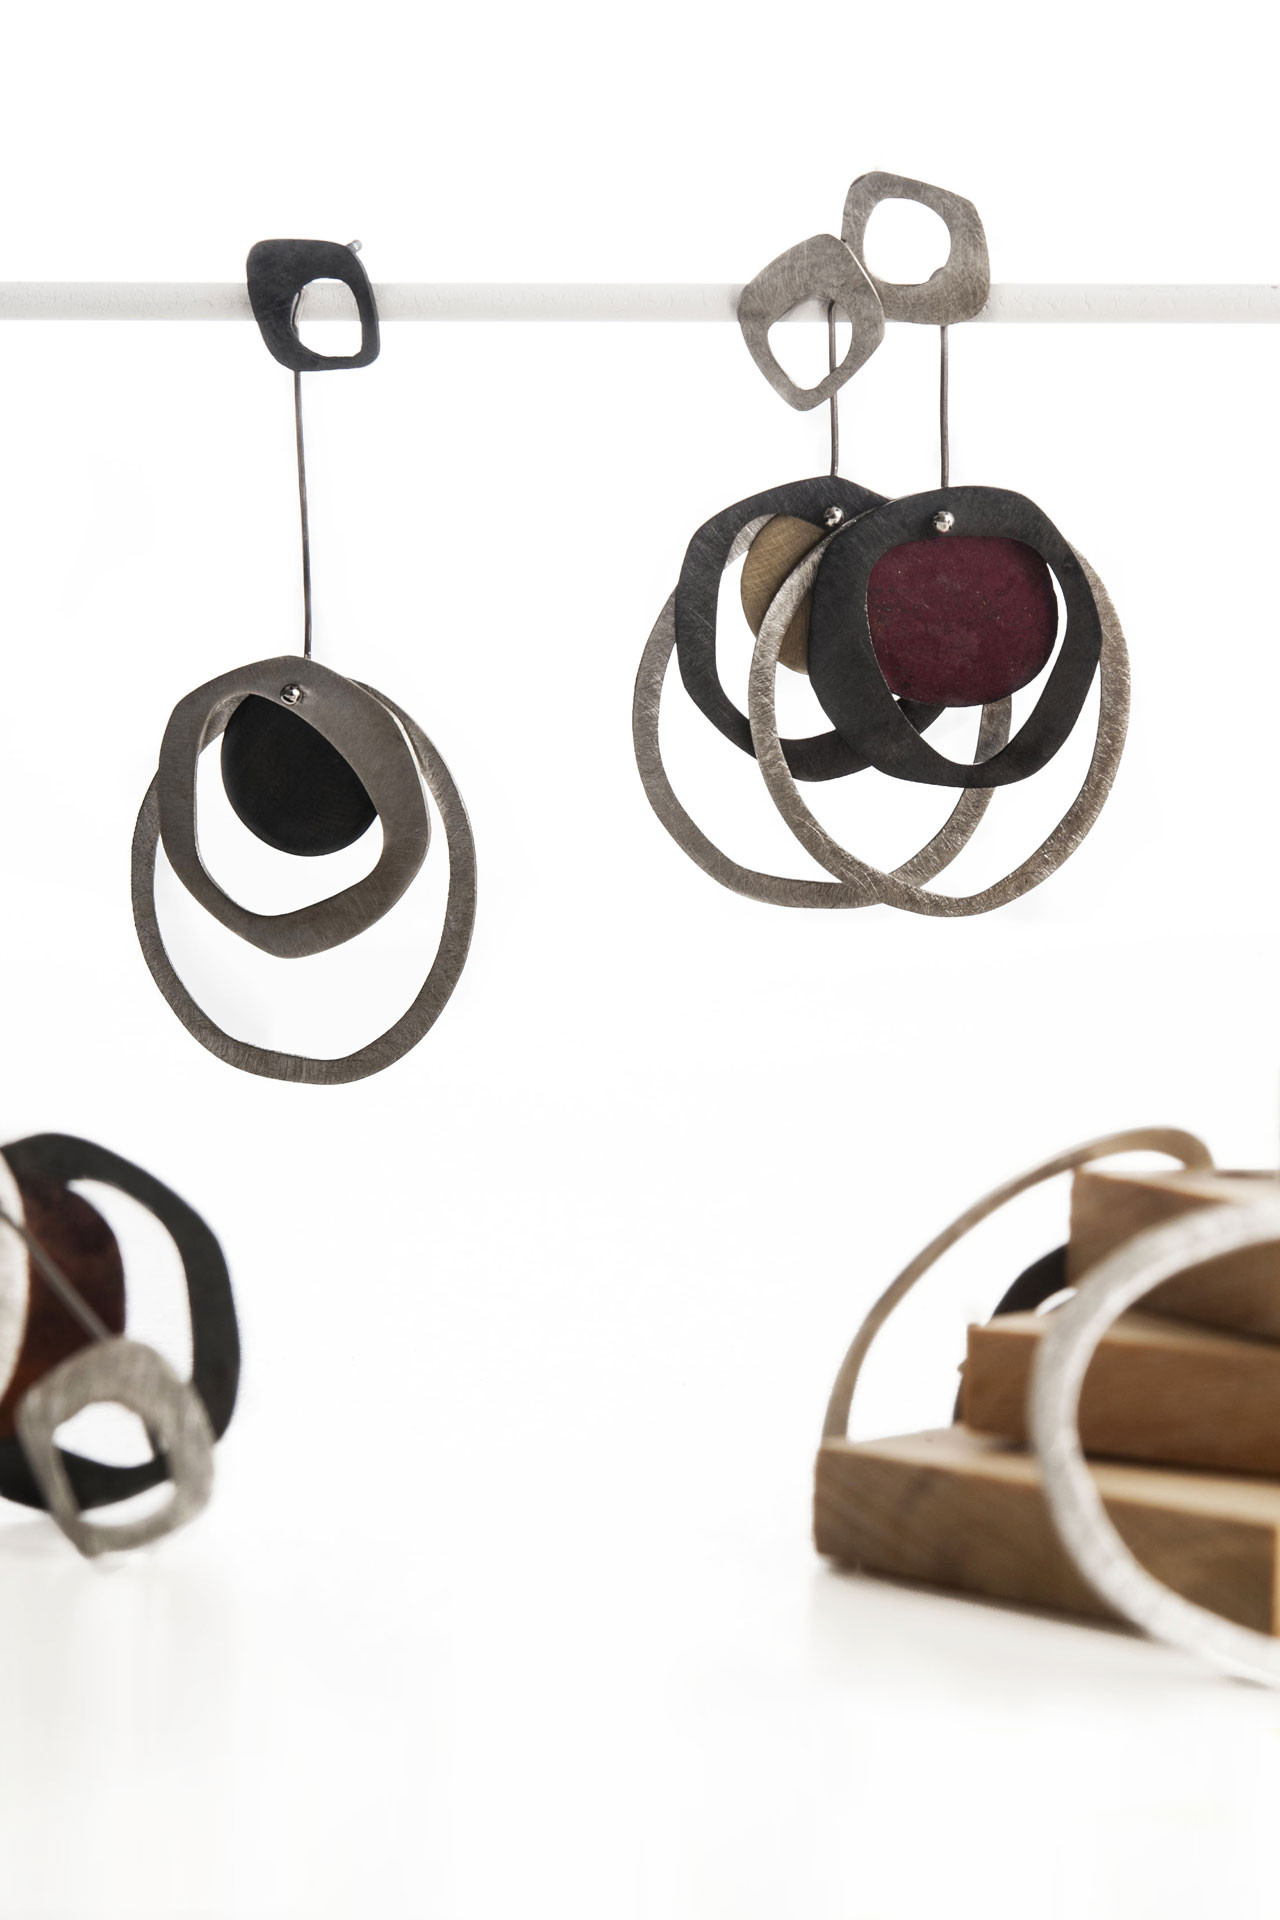 Aines handmade Jewellery - Rounded Shapes Collection - Silver, Copper and gold earrings.